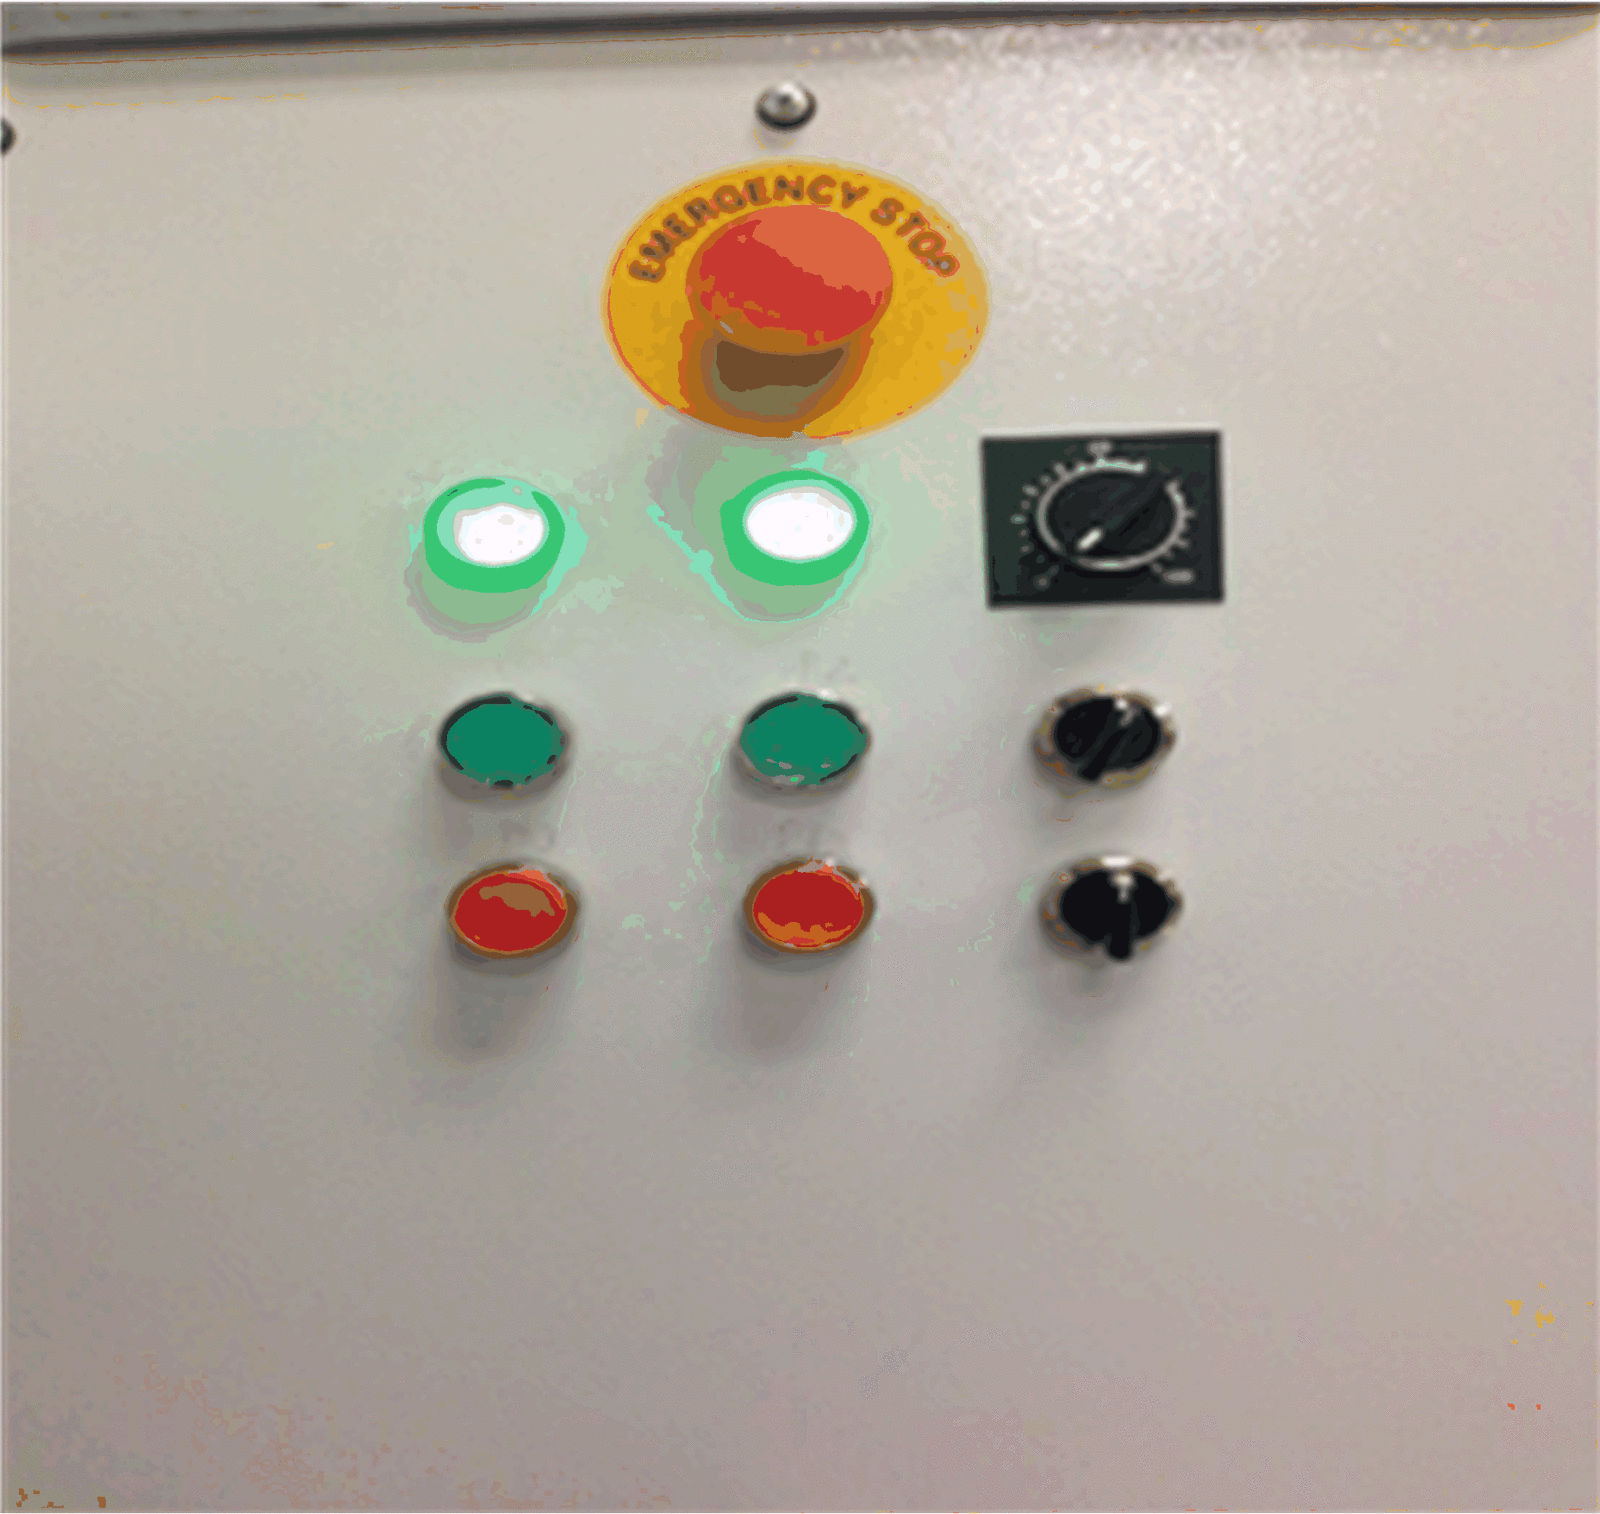 figure 2 – indicator lights on front of mcp